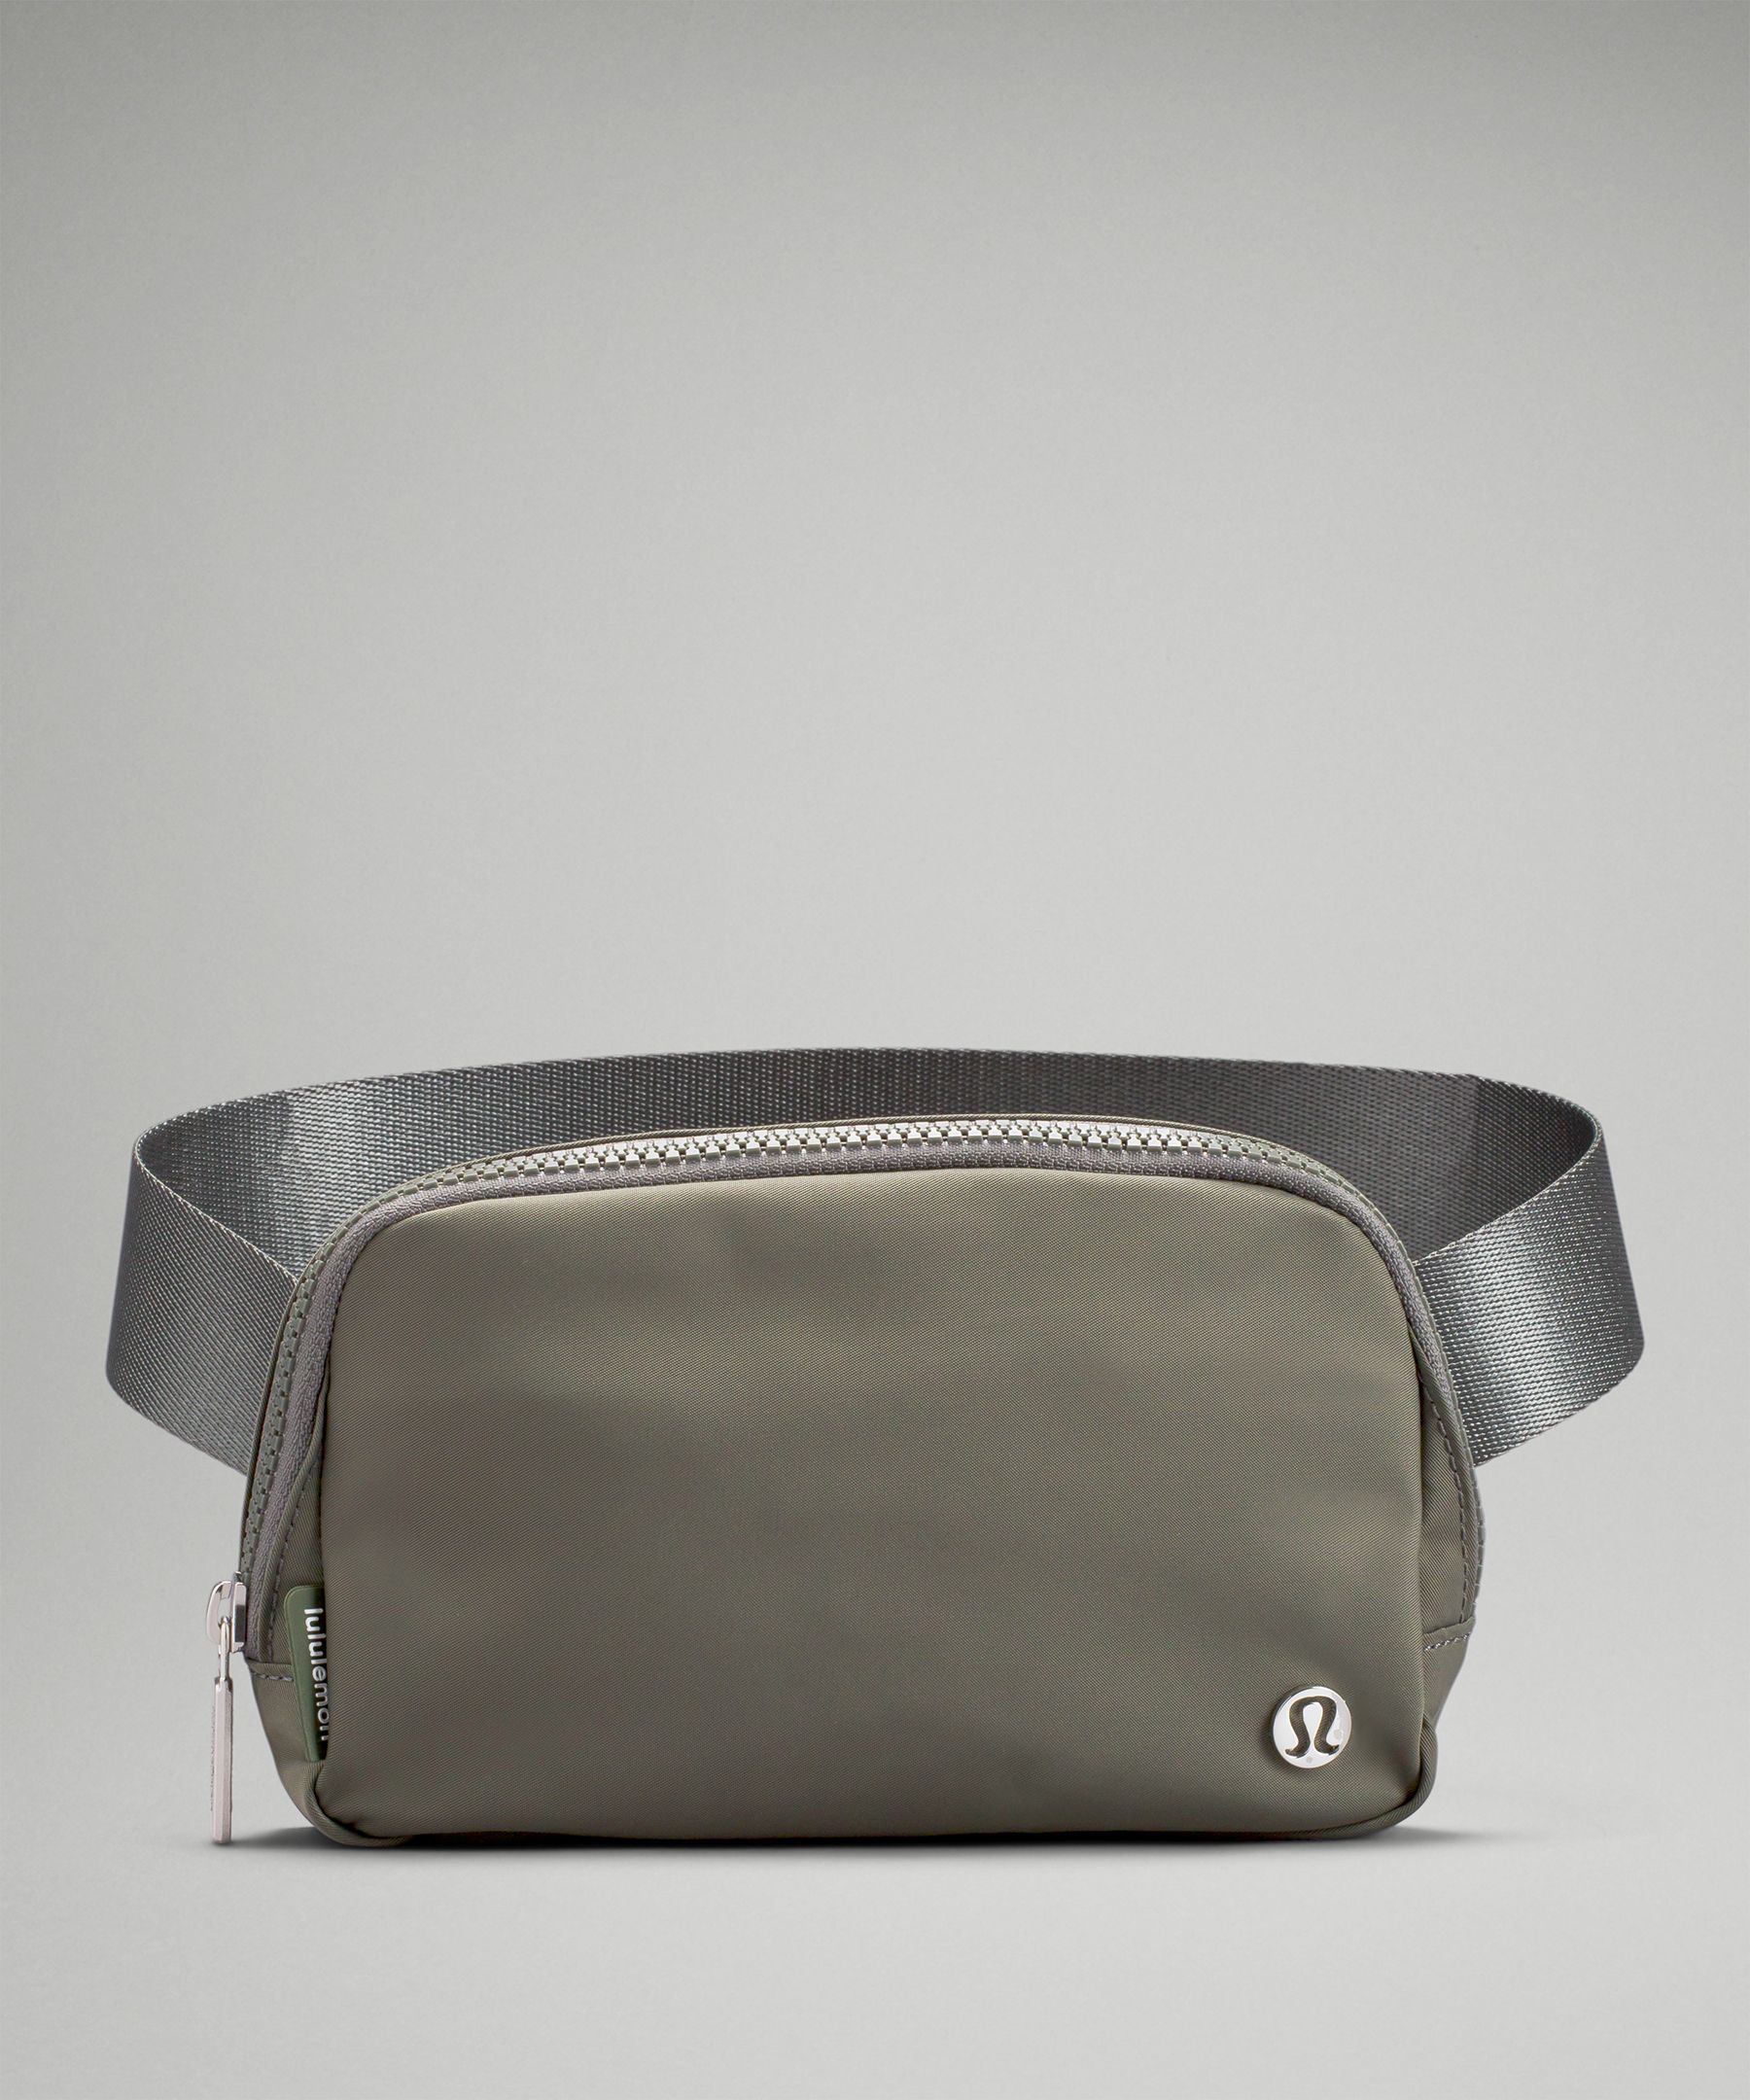 Minefield Testify for example Everywhere Belt Bag 1L | Unisex Bags,Purses,Wallets | lululemon